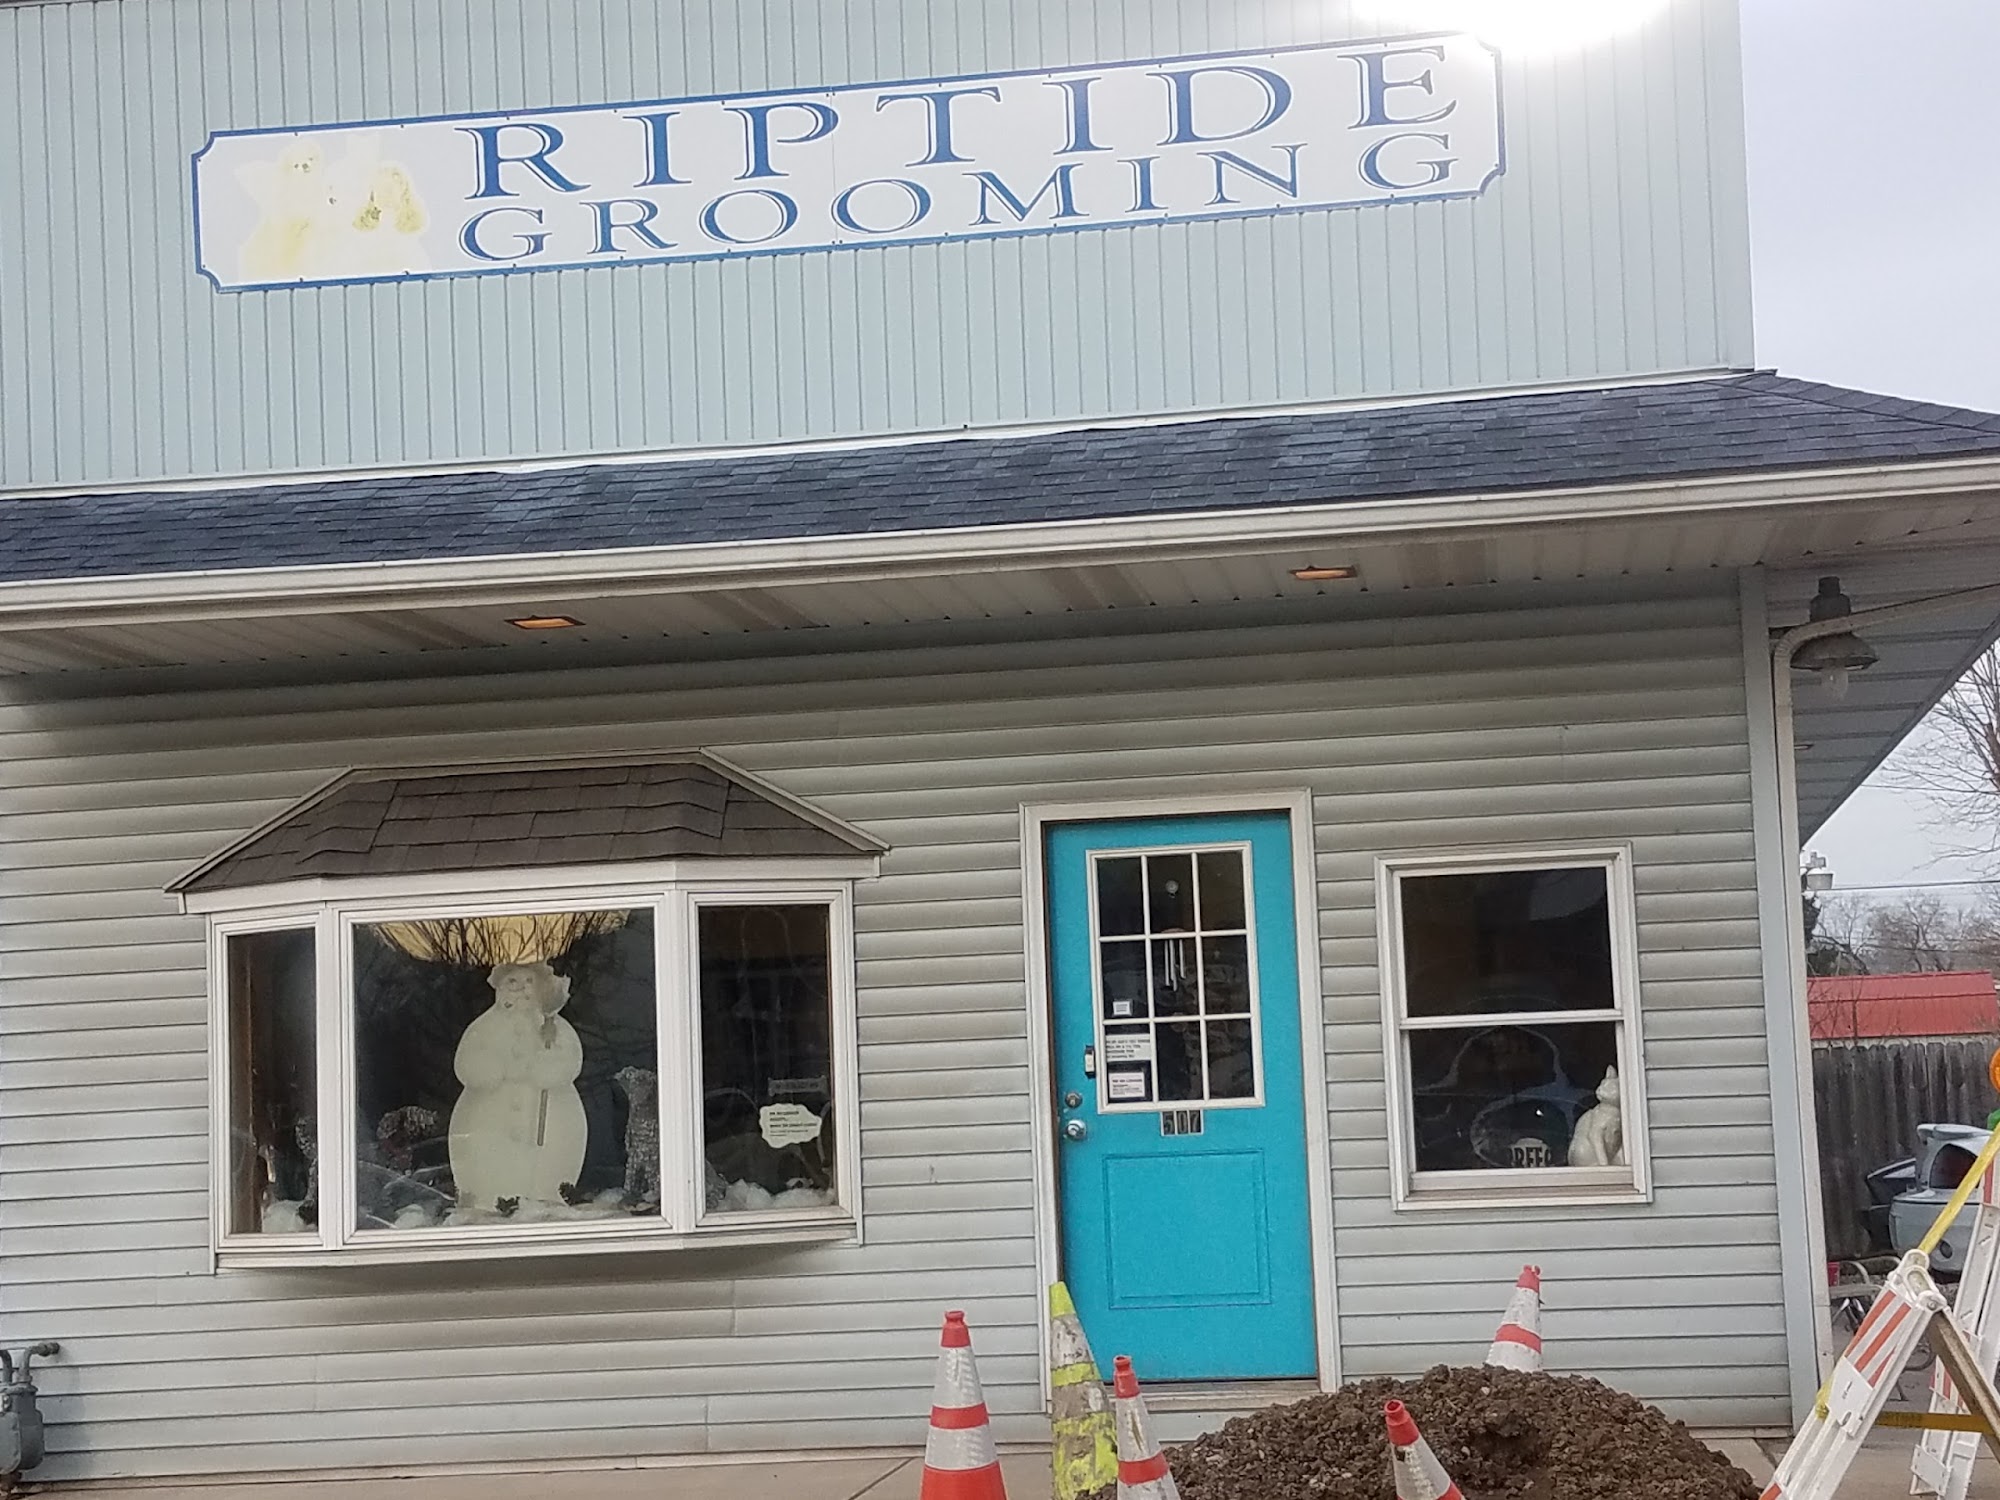 Riptide Grooming 507 4th St, St Albans West Virginia 25177